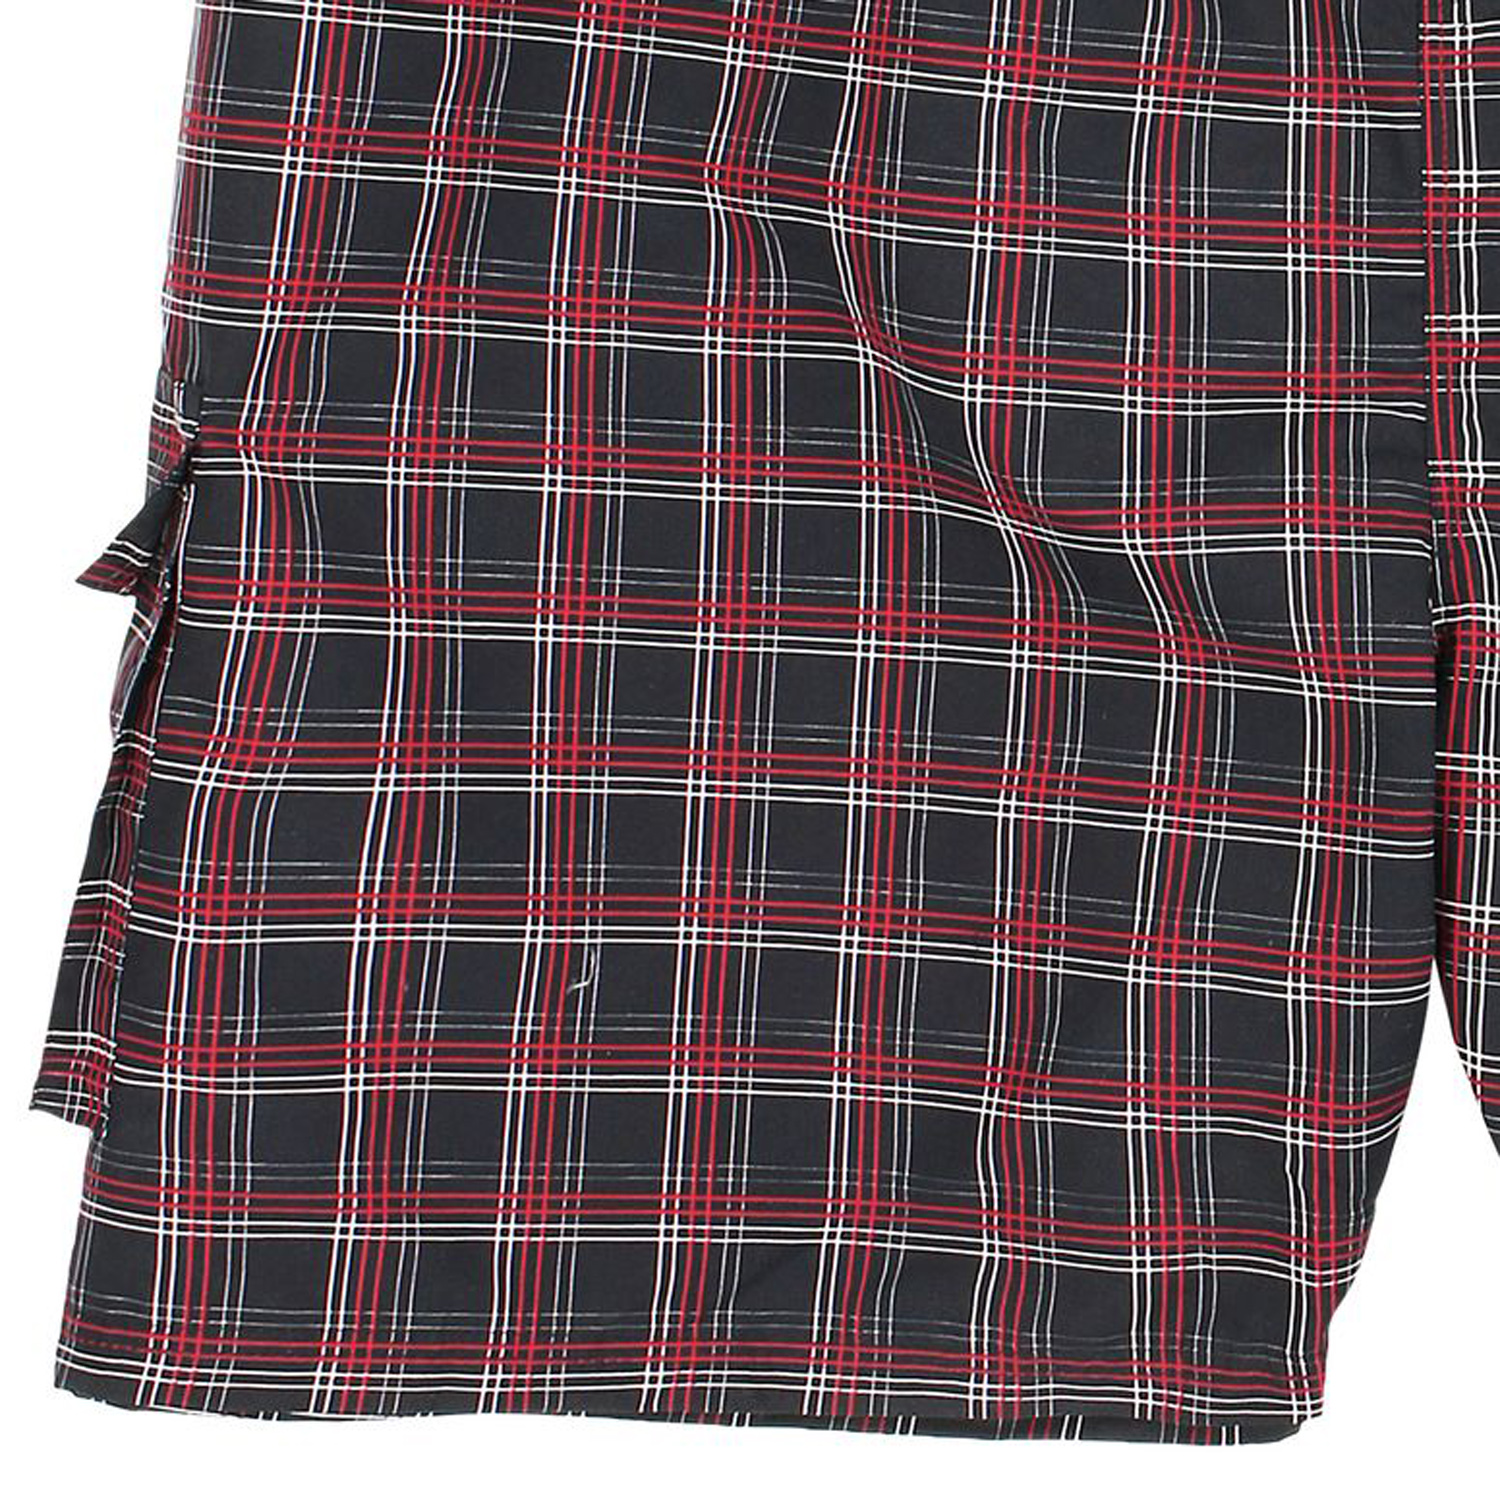 Swimming trunks in black-red-white-checked by eleMar up to oversize 10XL